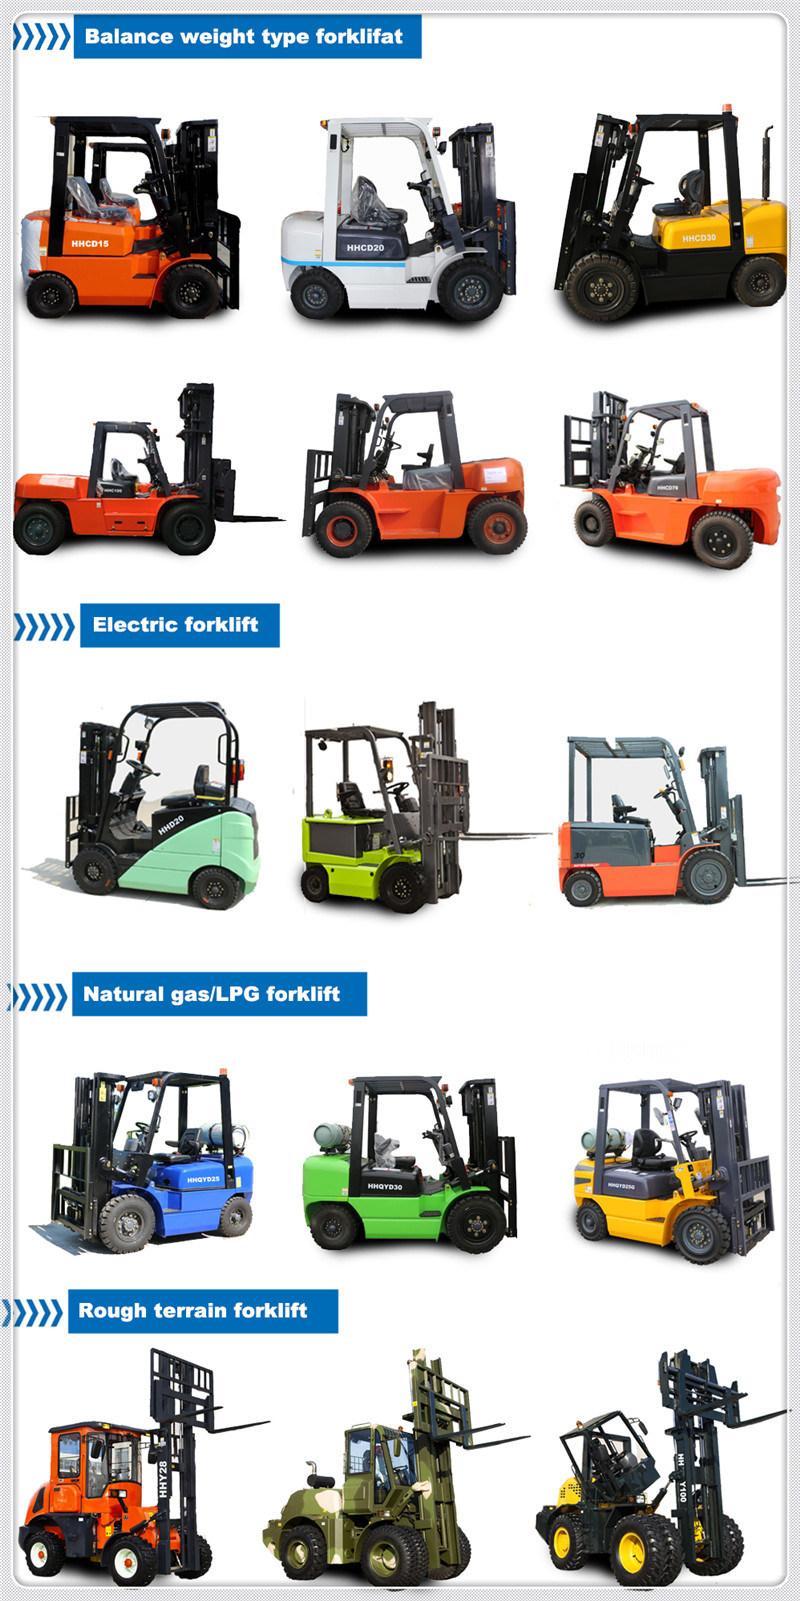 2016 New 2 Ton Diesel Hydraulic Forklift Truck Cpcd20 with CE Certification